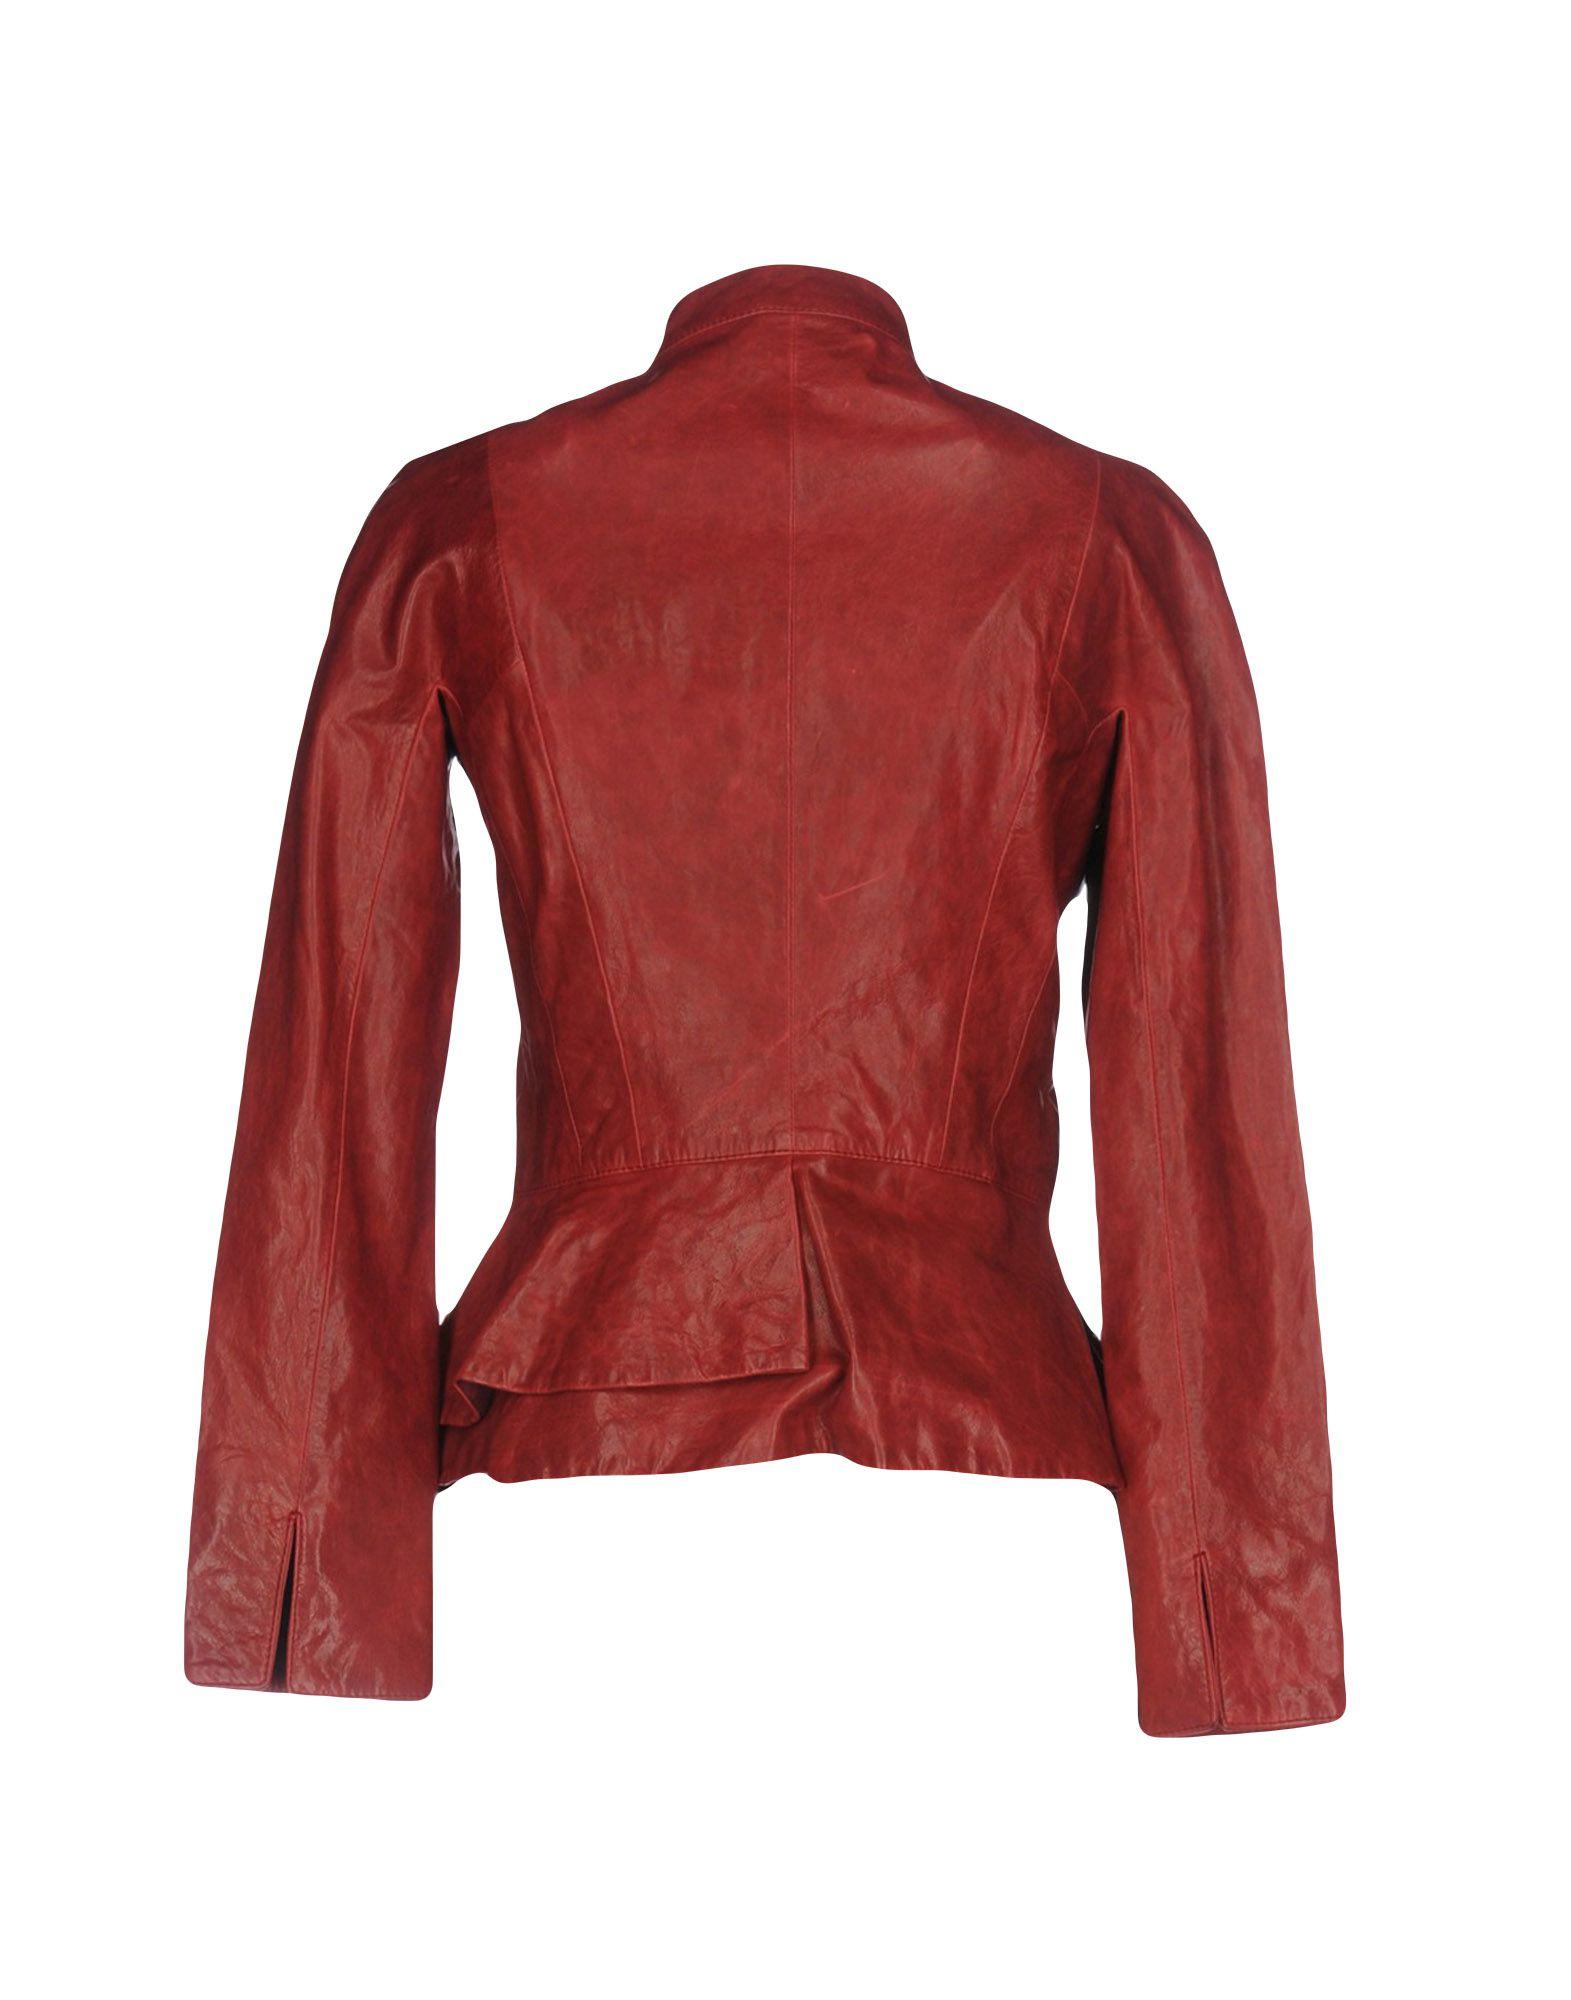 Lyst - Emporio Armani Jacket in Red